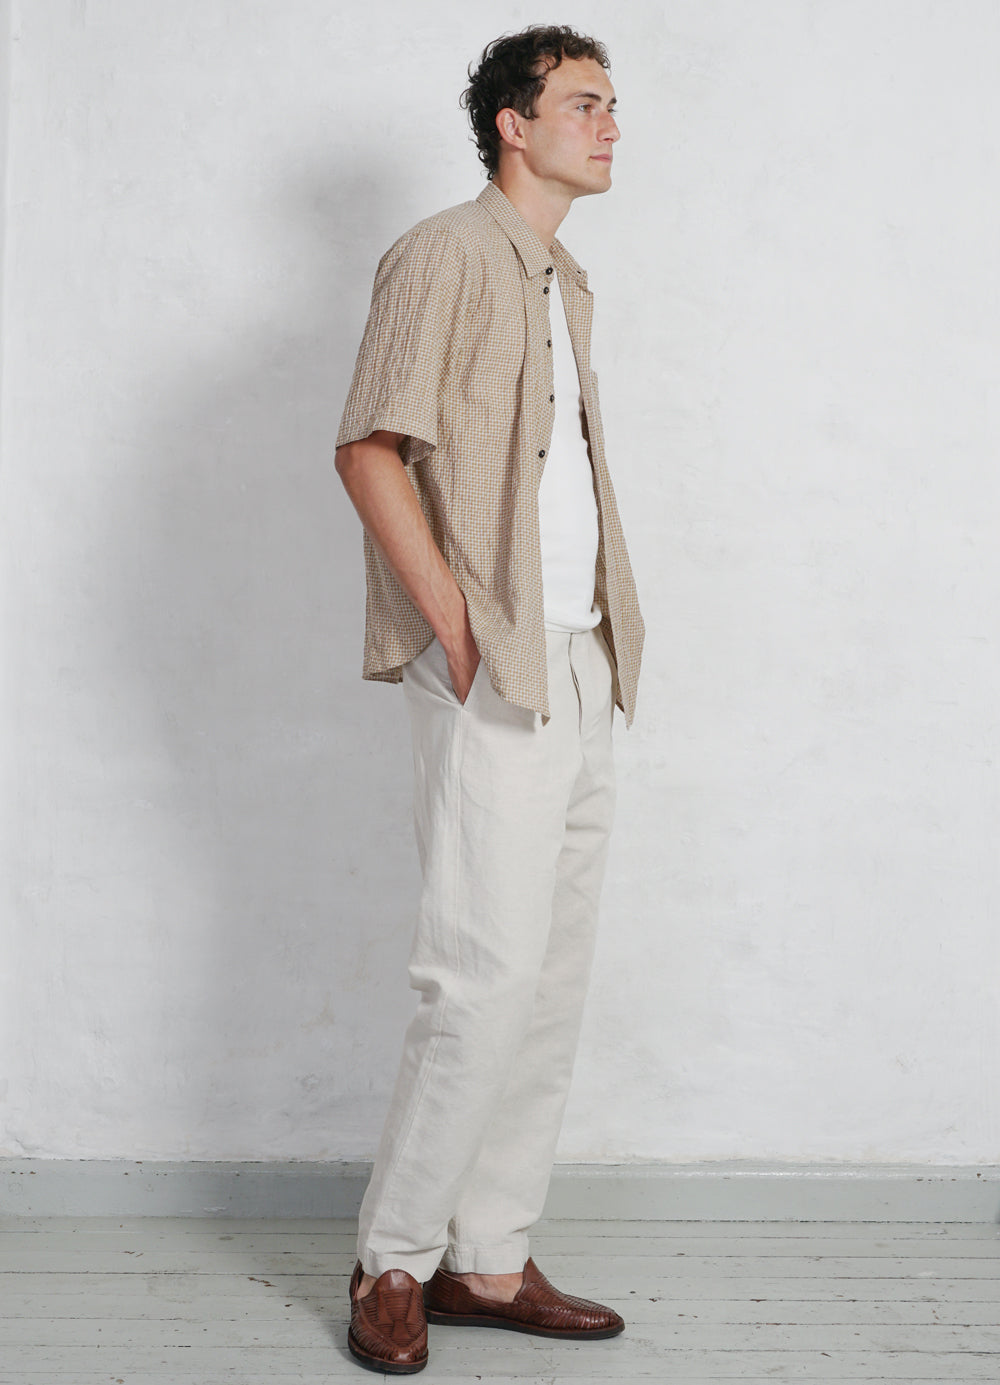 KEN | Wide Cut Trousers | Natural Flax